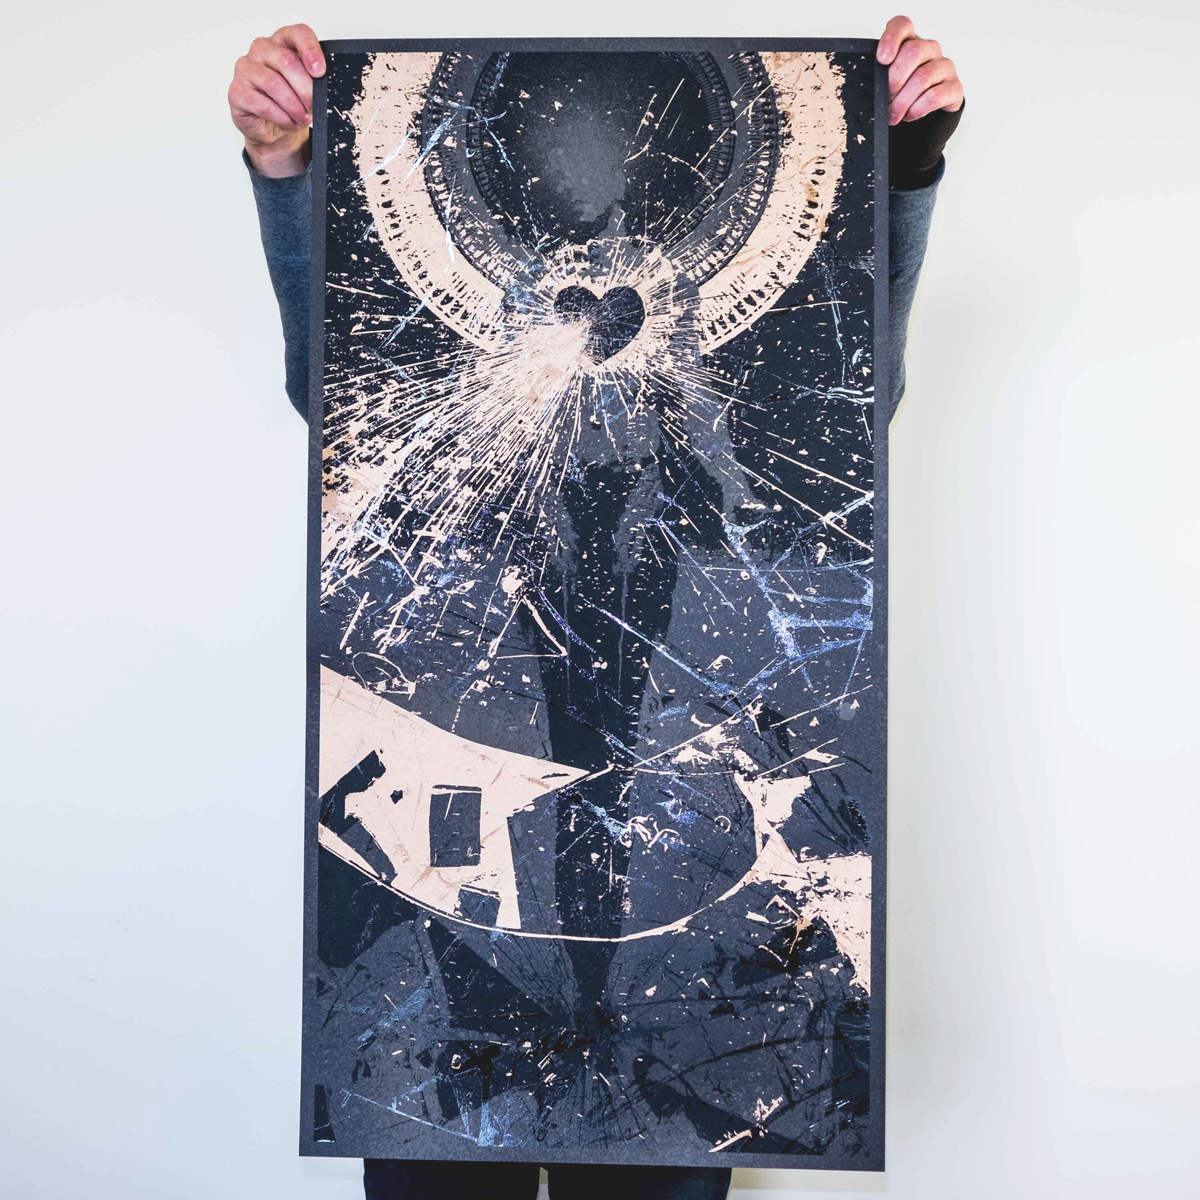 J. Bannon “In Place Apart: Bleached Black Edition” Silkscreened Print